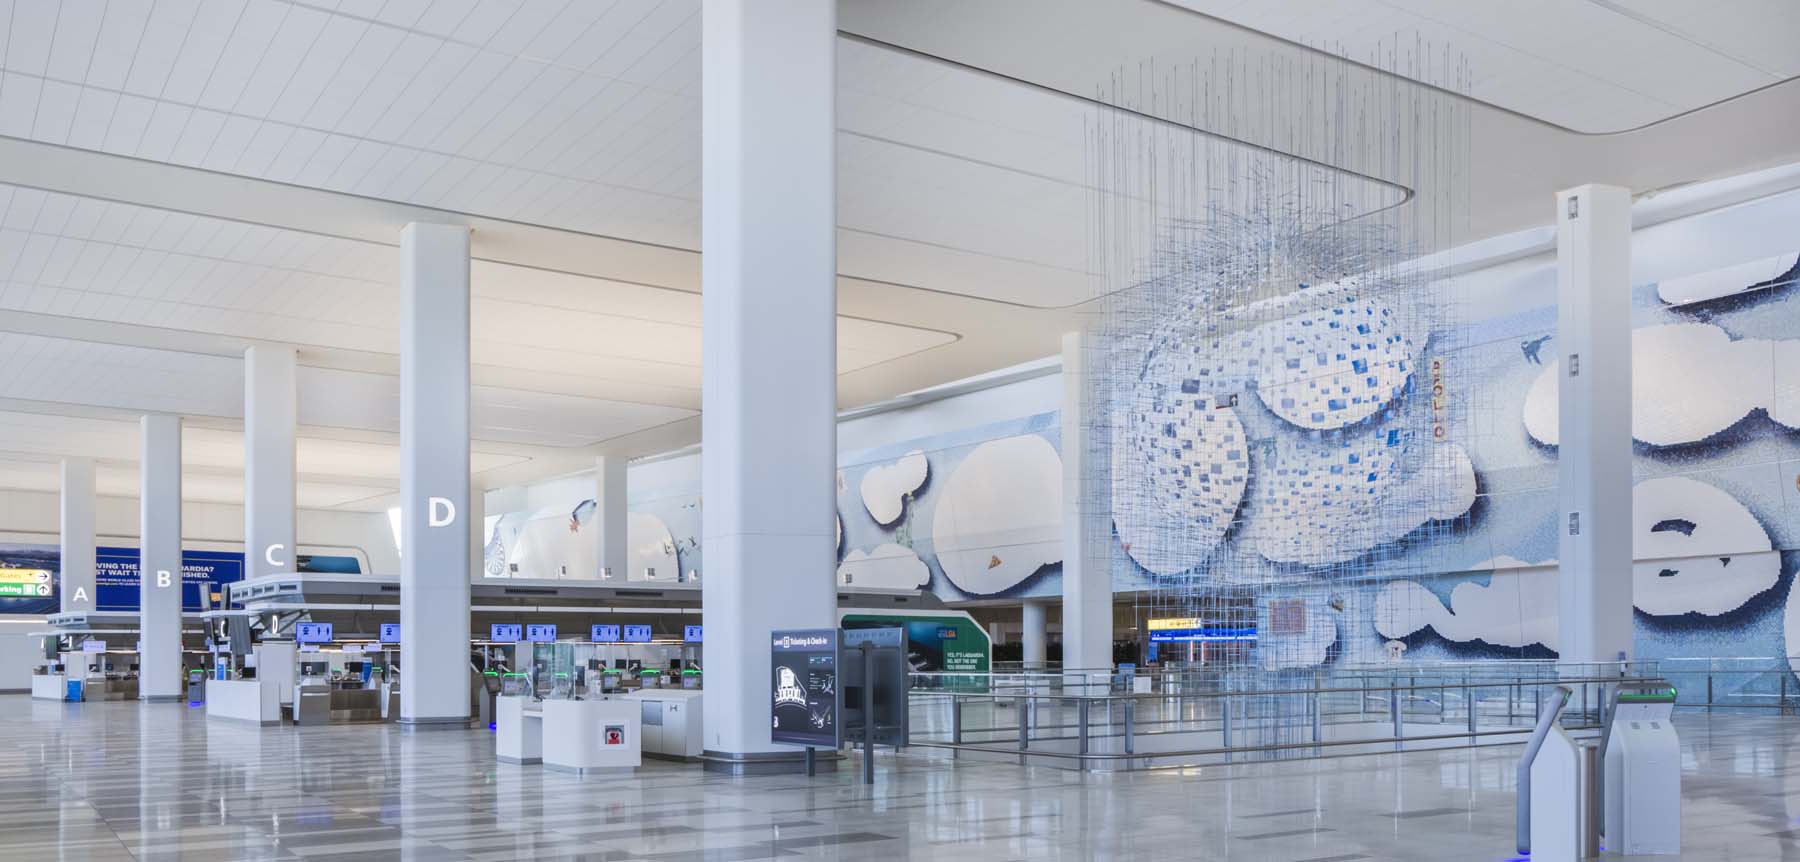 LaGuardia Terminal B is empty of travelers but has a blue mural and art installation.